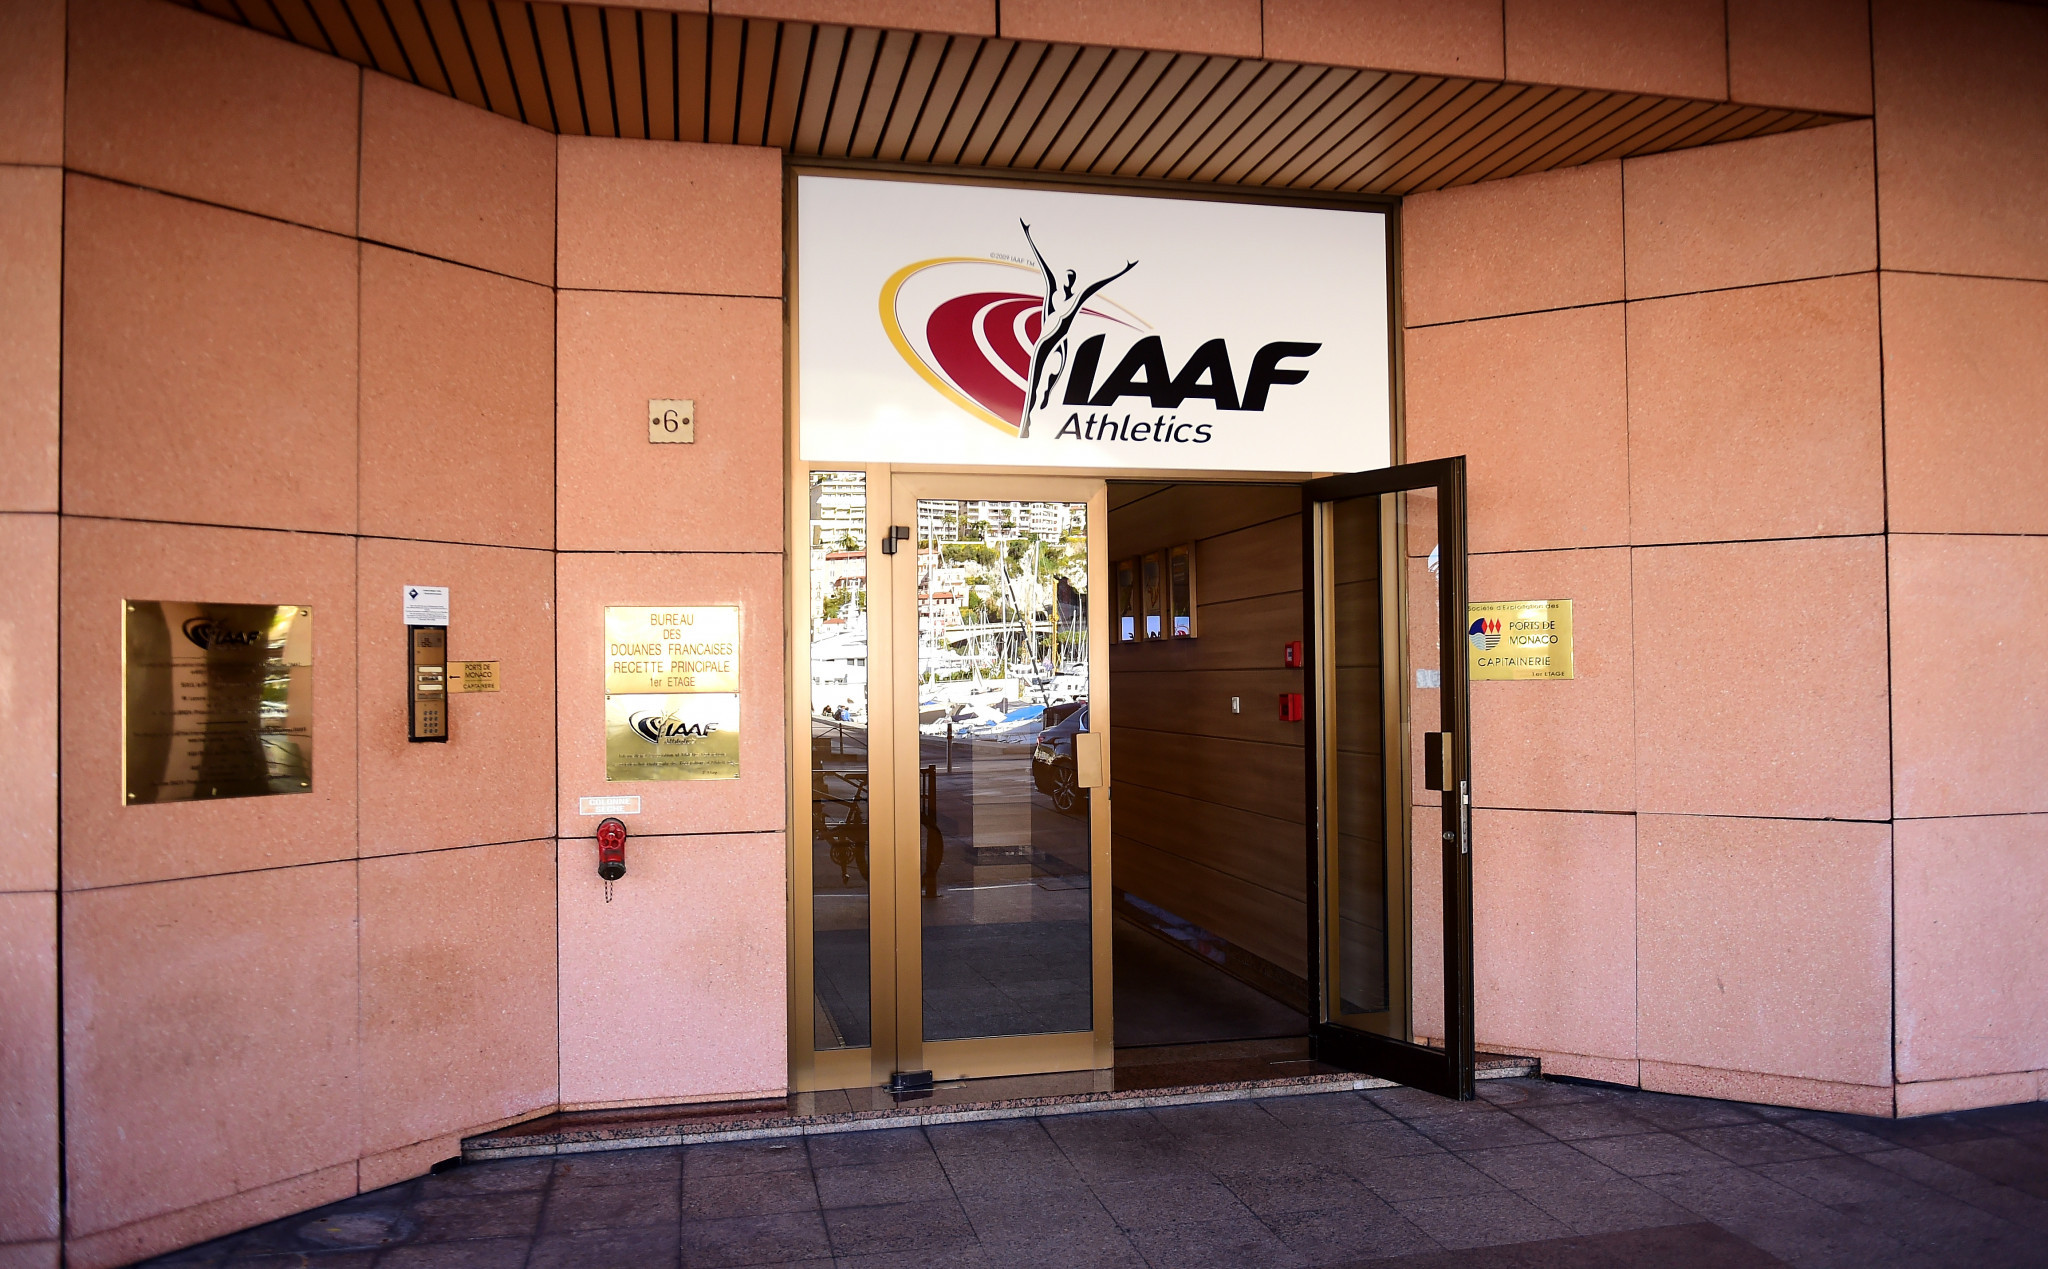 Russian Sports Minister to meet Coe to discuss reintegration into IAAF